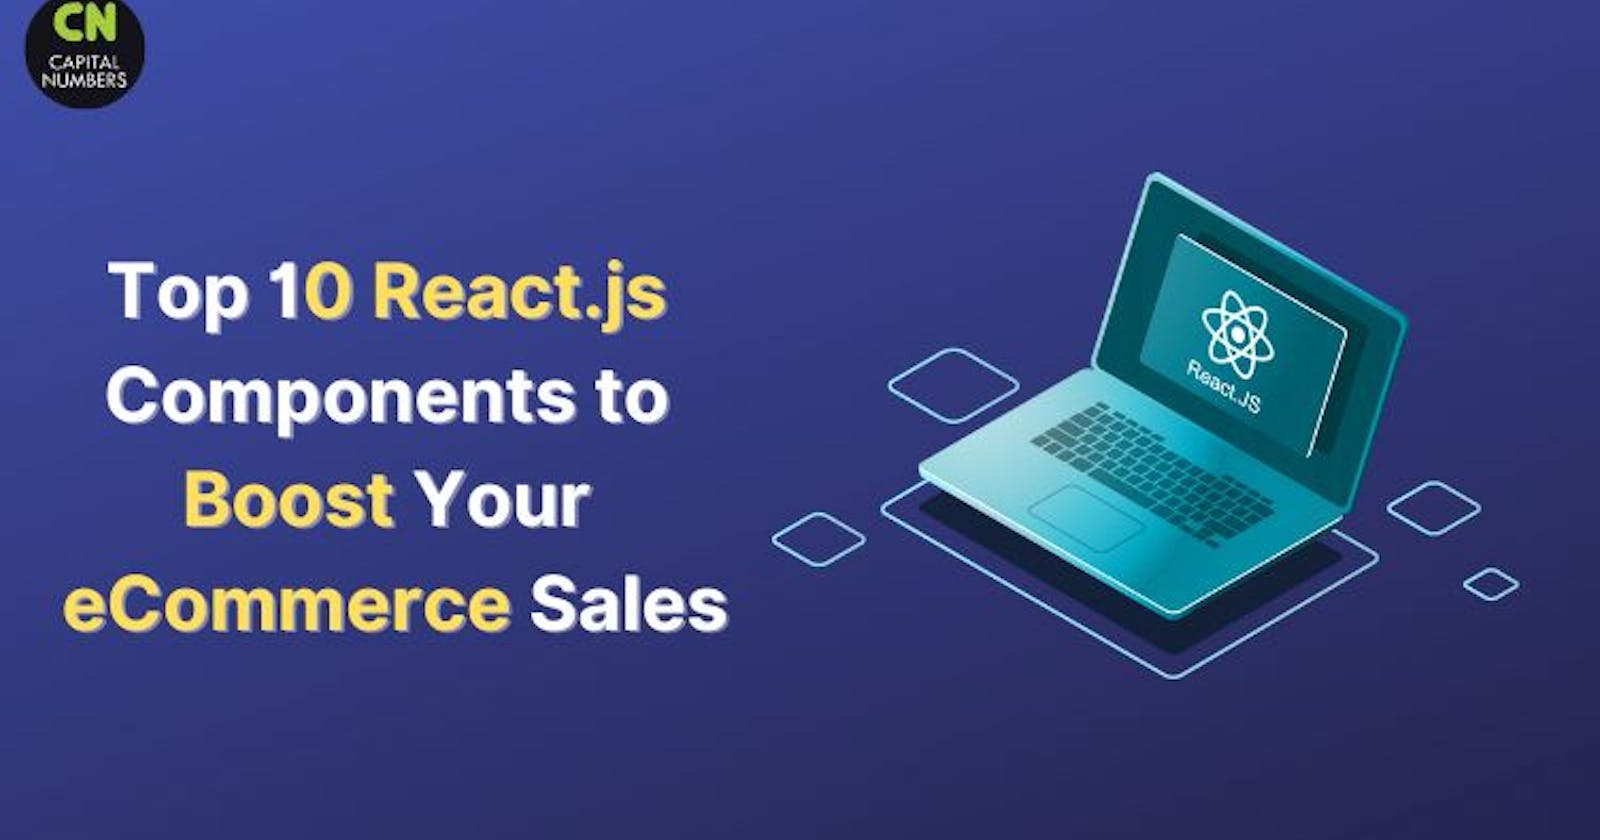 Top 10 React.js Components to Boost Your E-commerce Sales